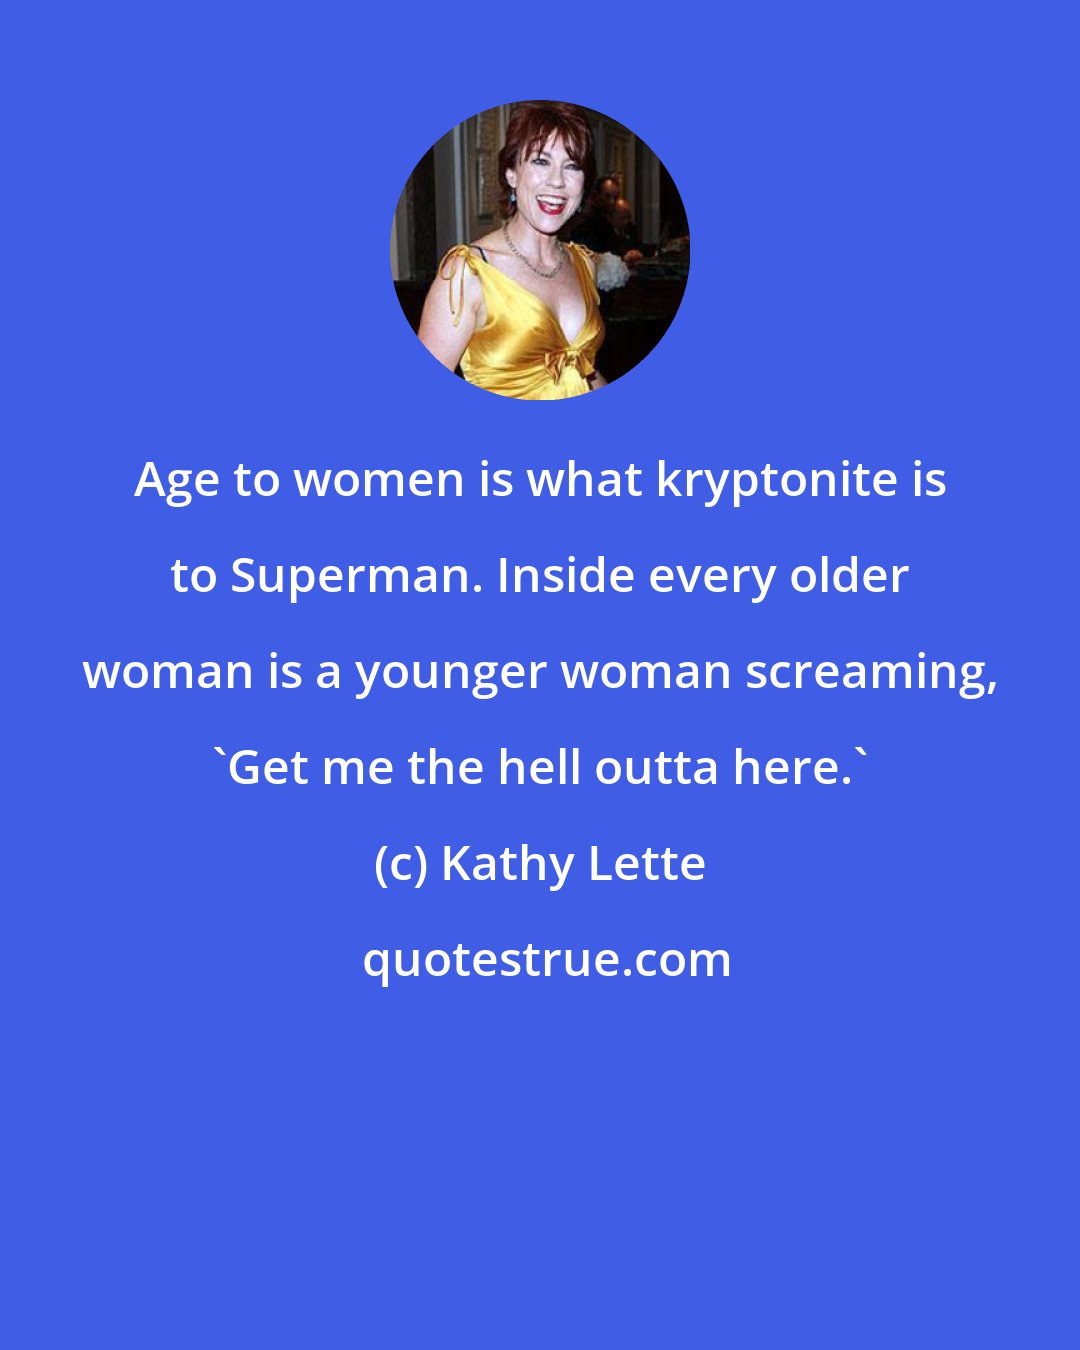 Kathy Lette: Age to women is what kryptonite is to Superman. Inside every older woman is a younger woman screaming, 'Get me the hell outta here.'